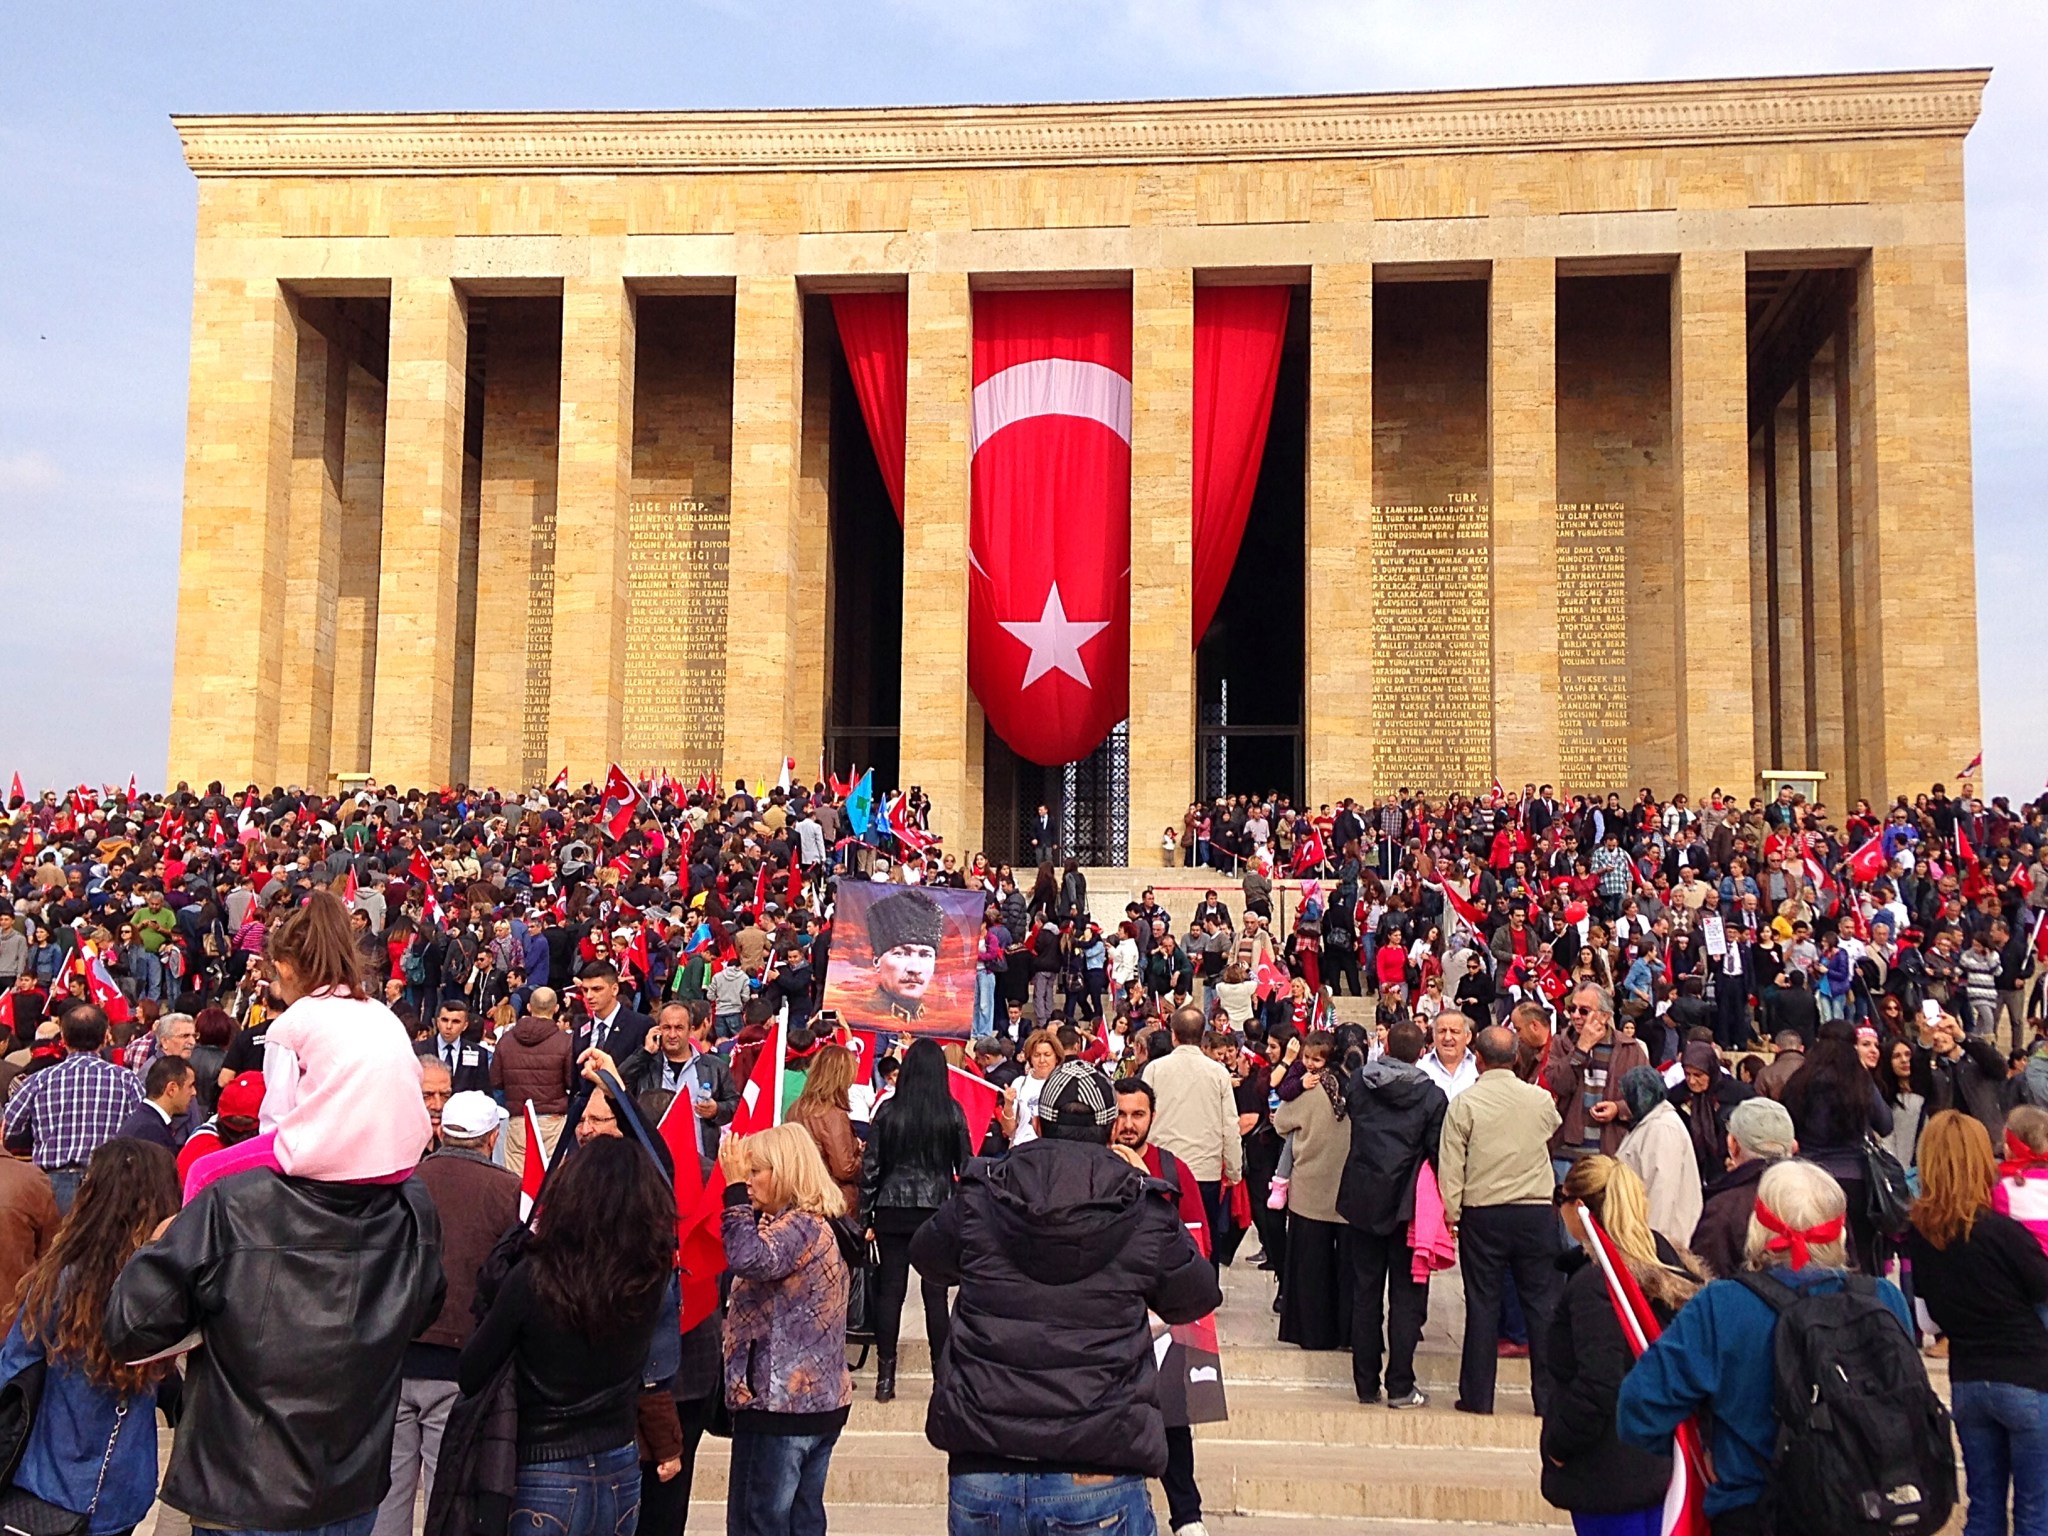 A large group in Turkey gathers outside